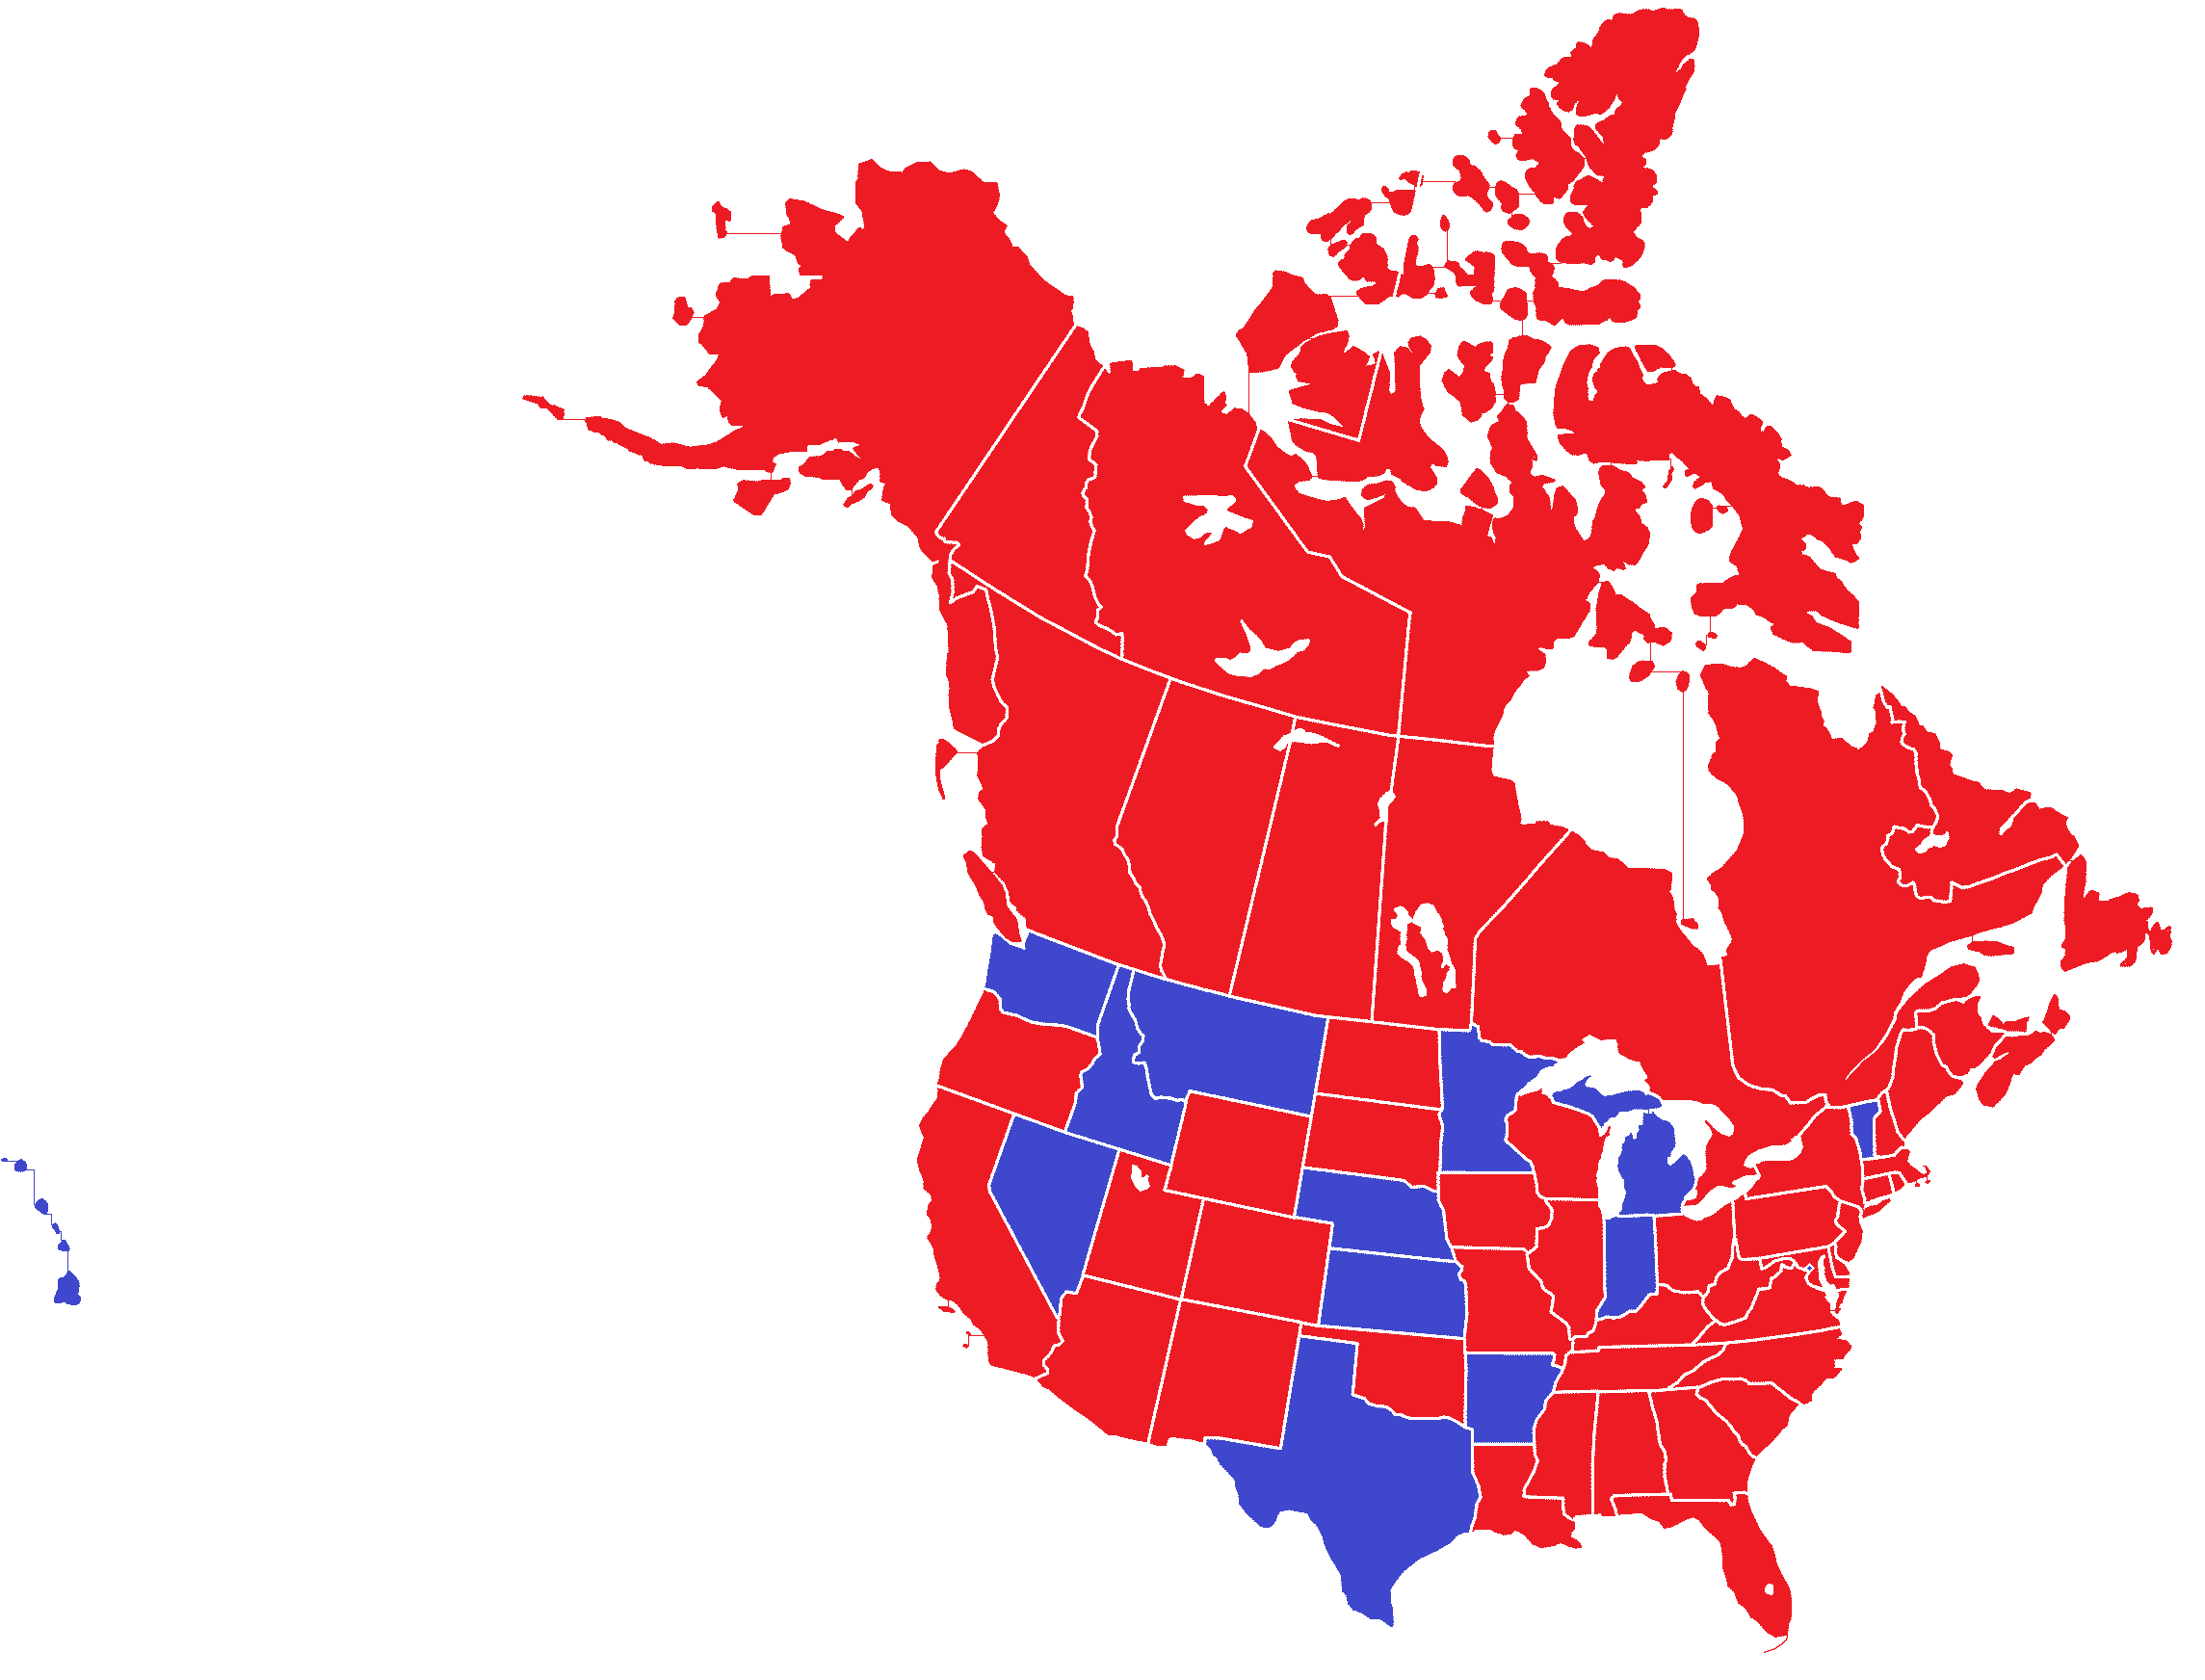 File; File history; File links. File:1916 us election map.png